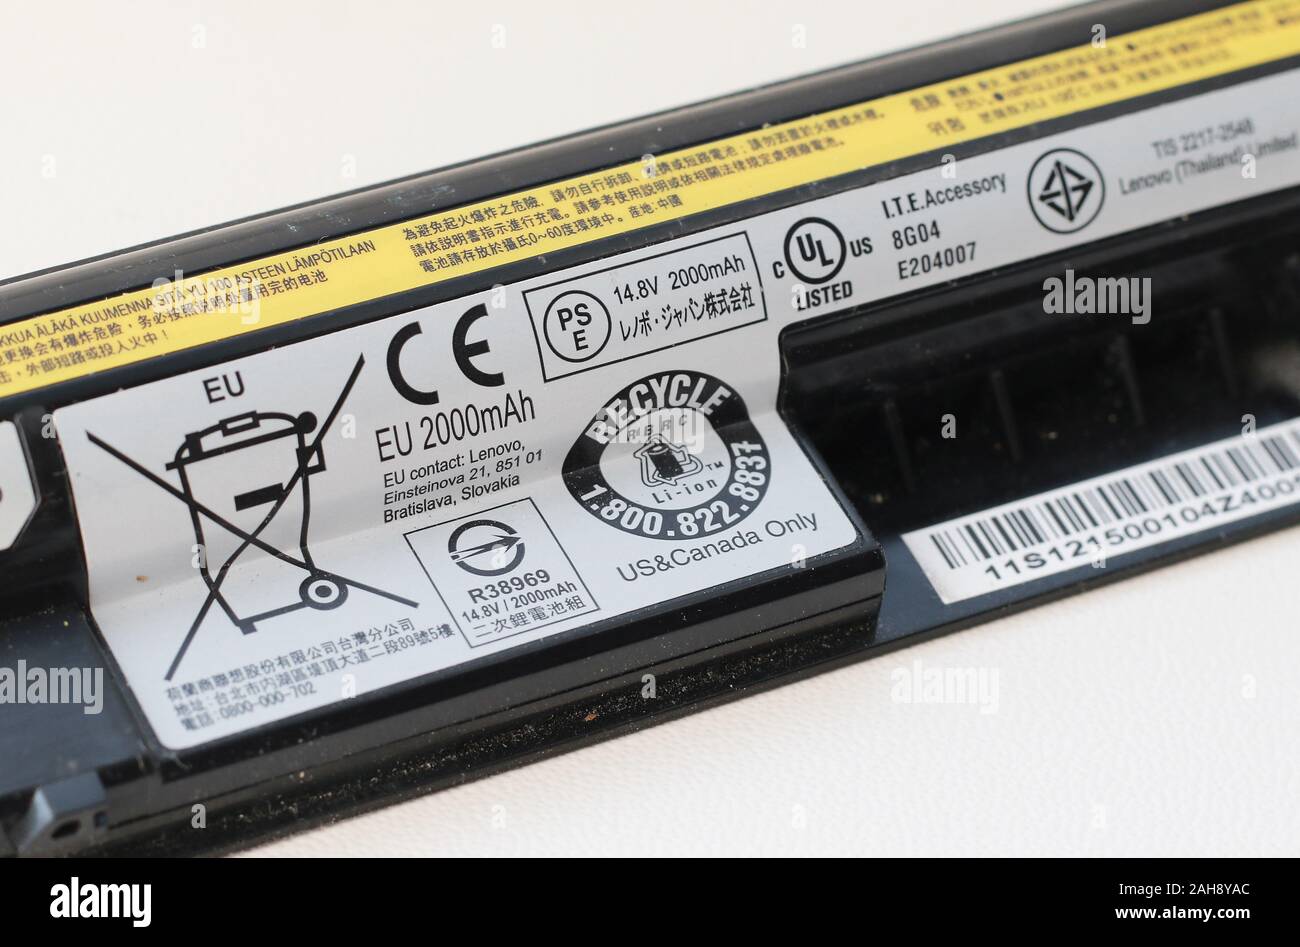 Lenovo laptop battery with disposal instructions Stock Photo - Alamy